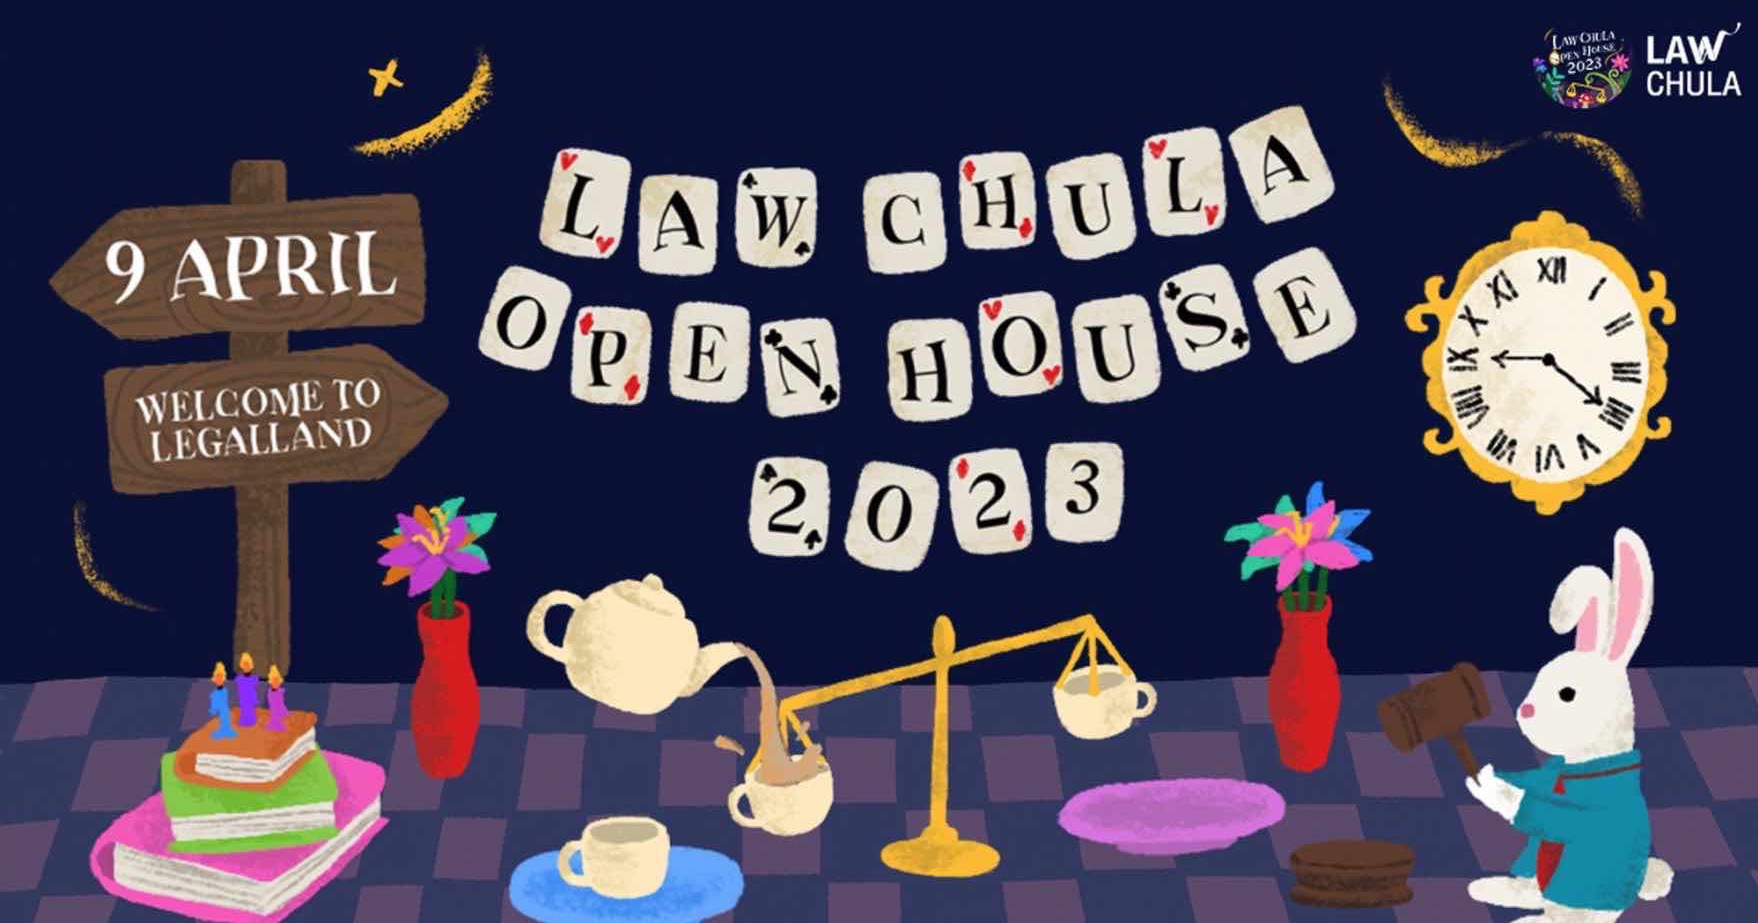 Law Chula Open House 2023